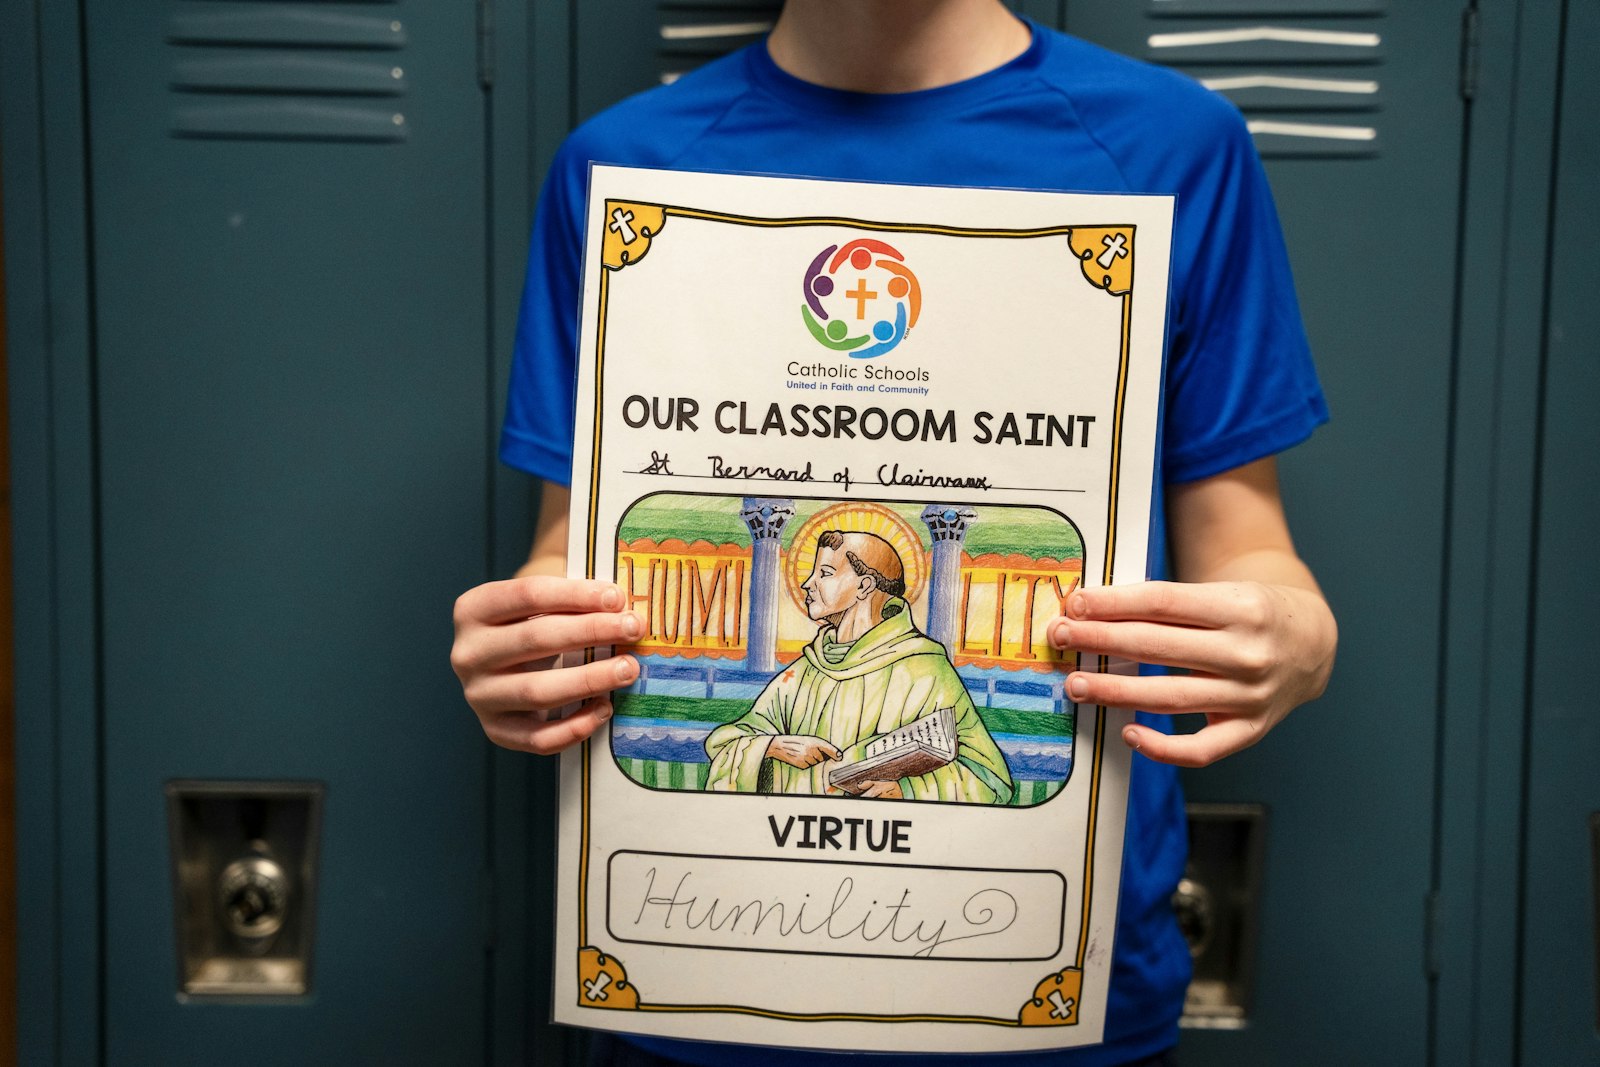 Each classroom creates an image of their saint, which they display proudly outside of their classroom door.